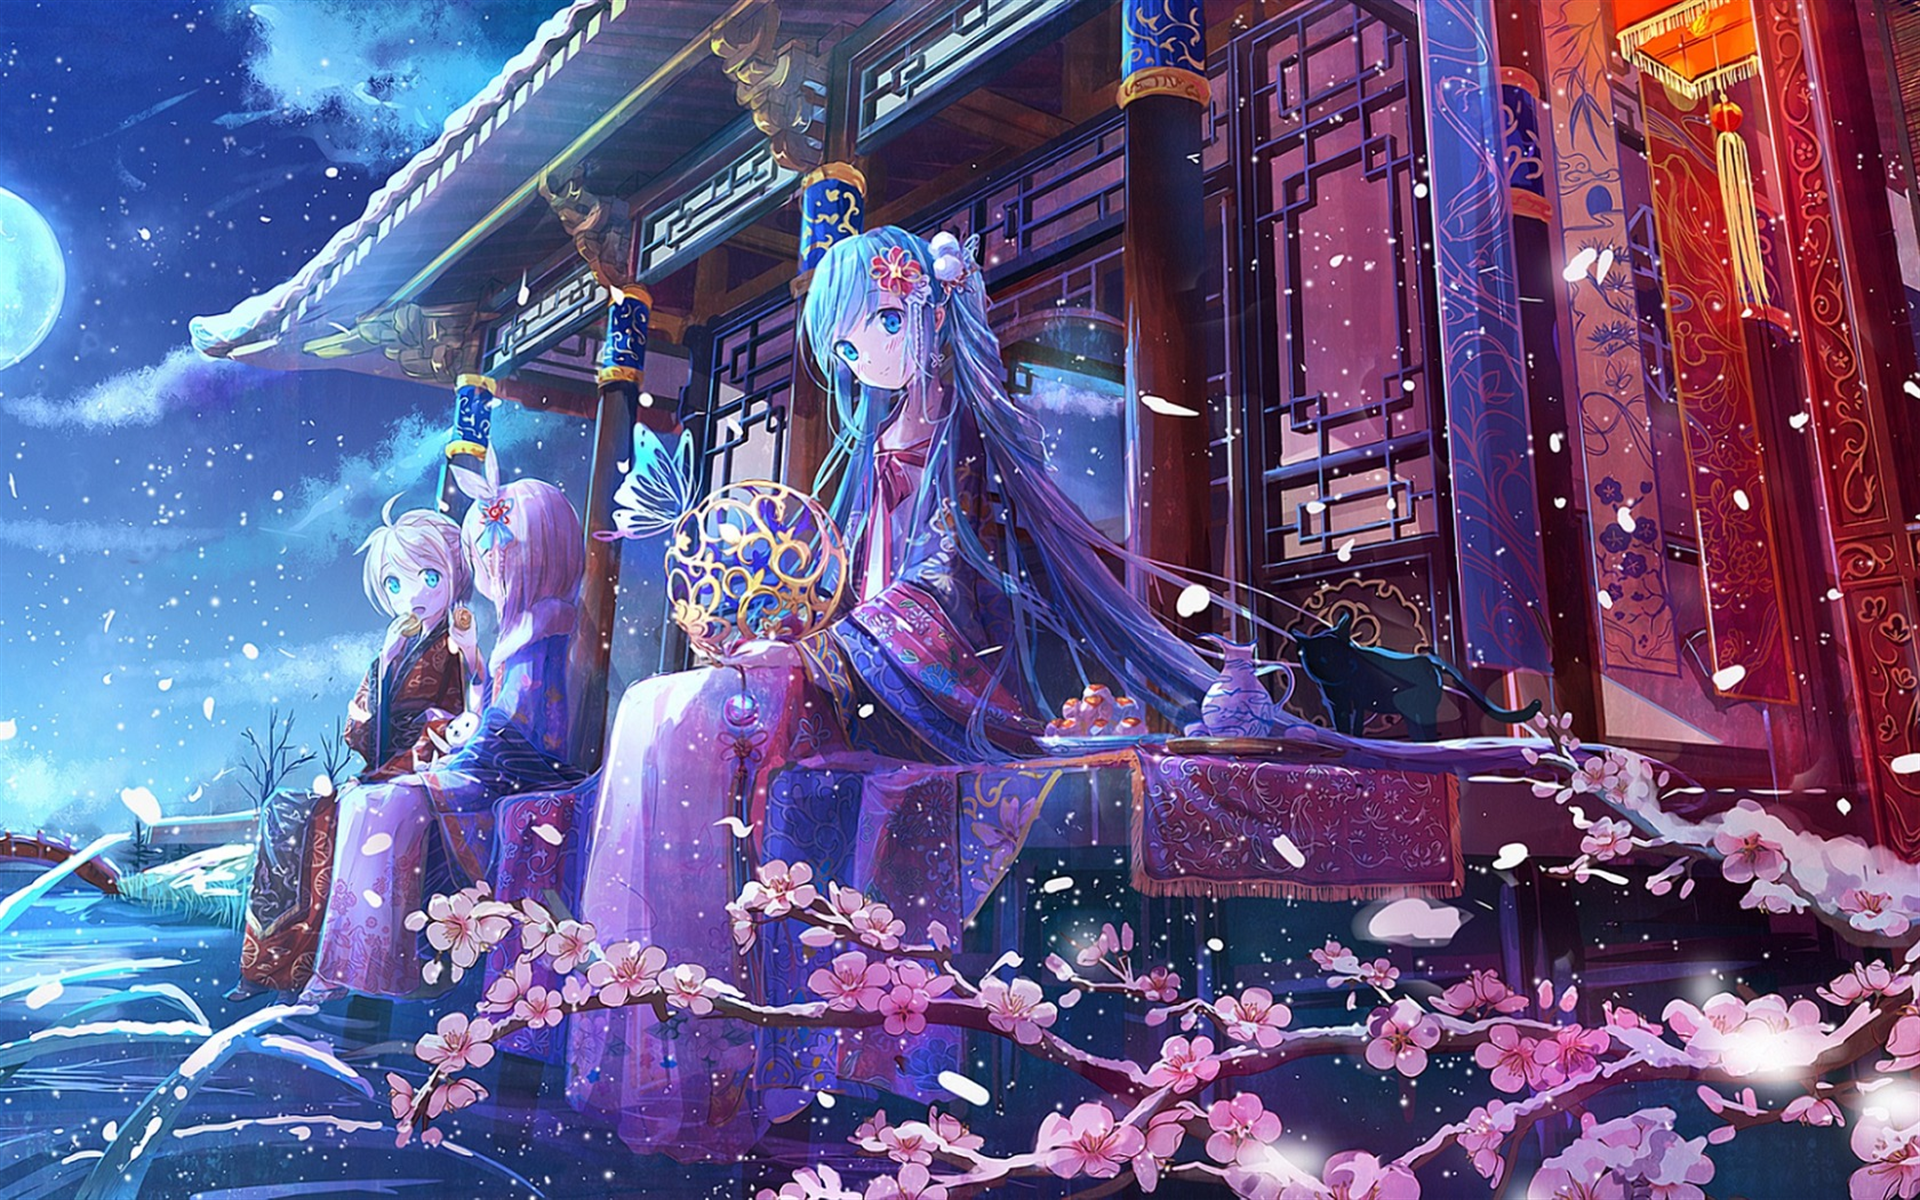 Download wallpaper anime characters, kimono, art, japanese manga, female characters, japanese temple for desktop with resolution 1920x1200. High Quality HD picture wallpaper